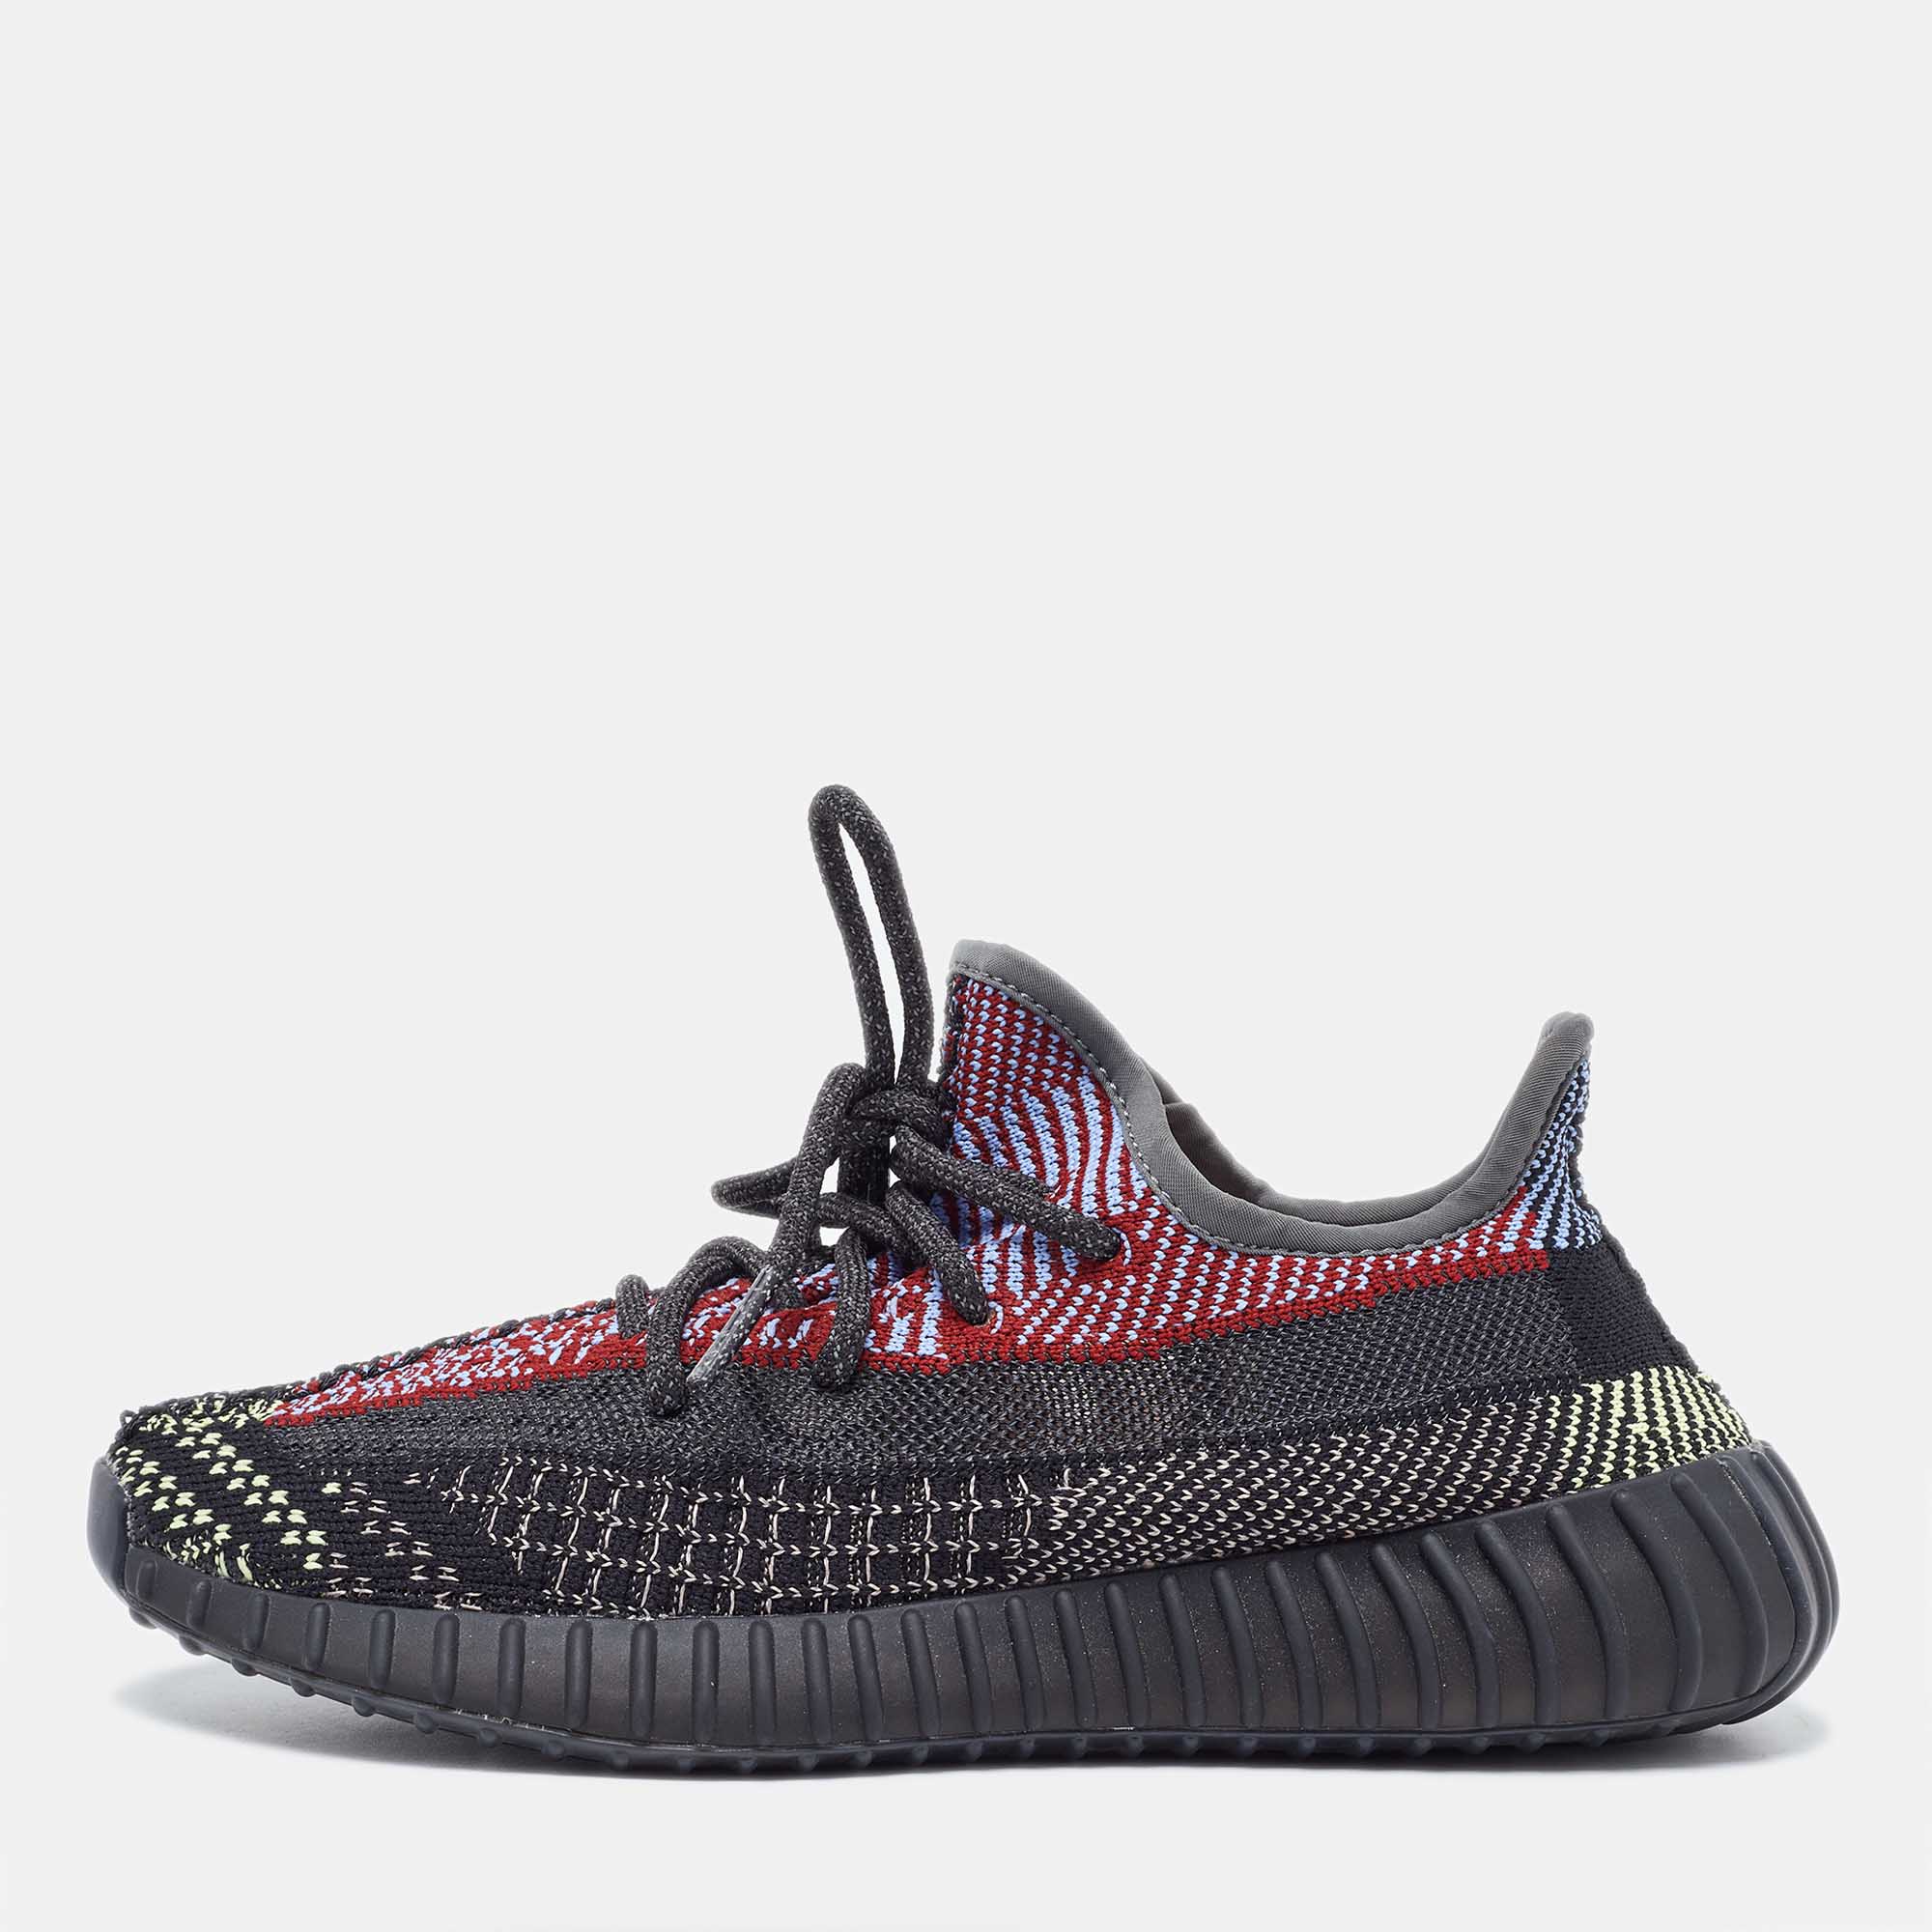 

Yeezy x Adidas Multicolor Knit Fabric Boost 350 V2 Yecheil (Non-Reflective) Sneakers Size 38.5, Black